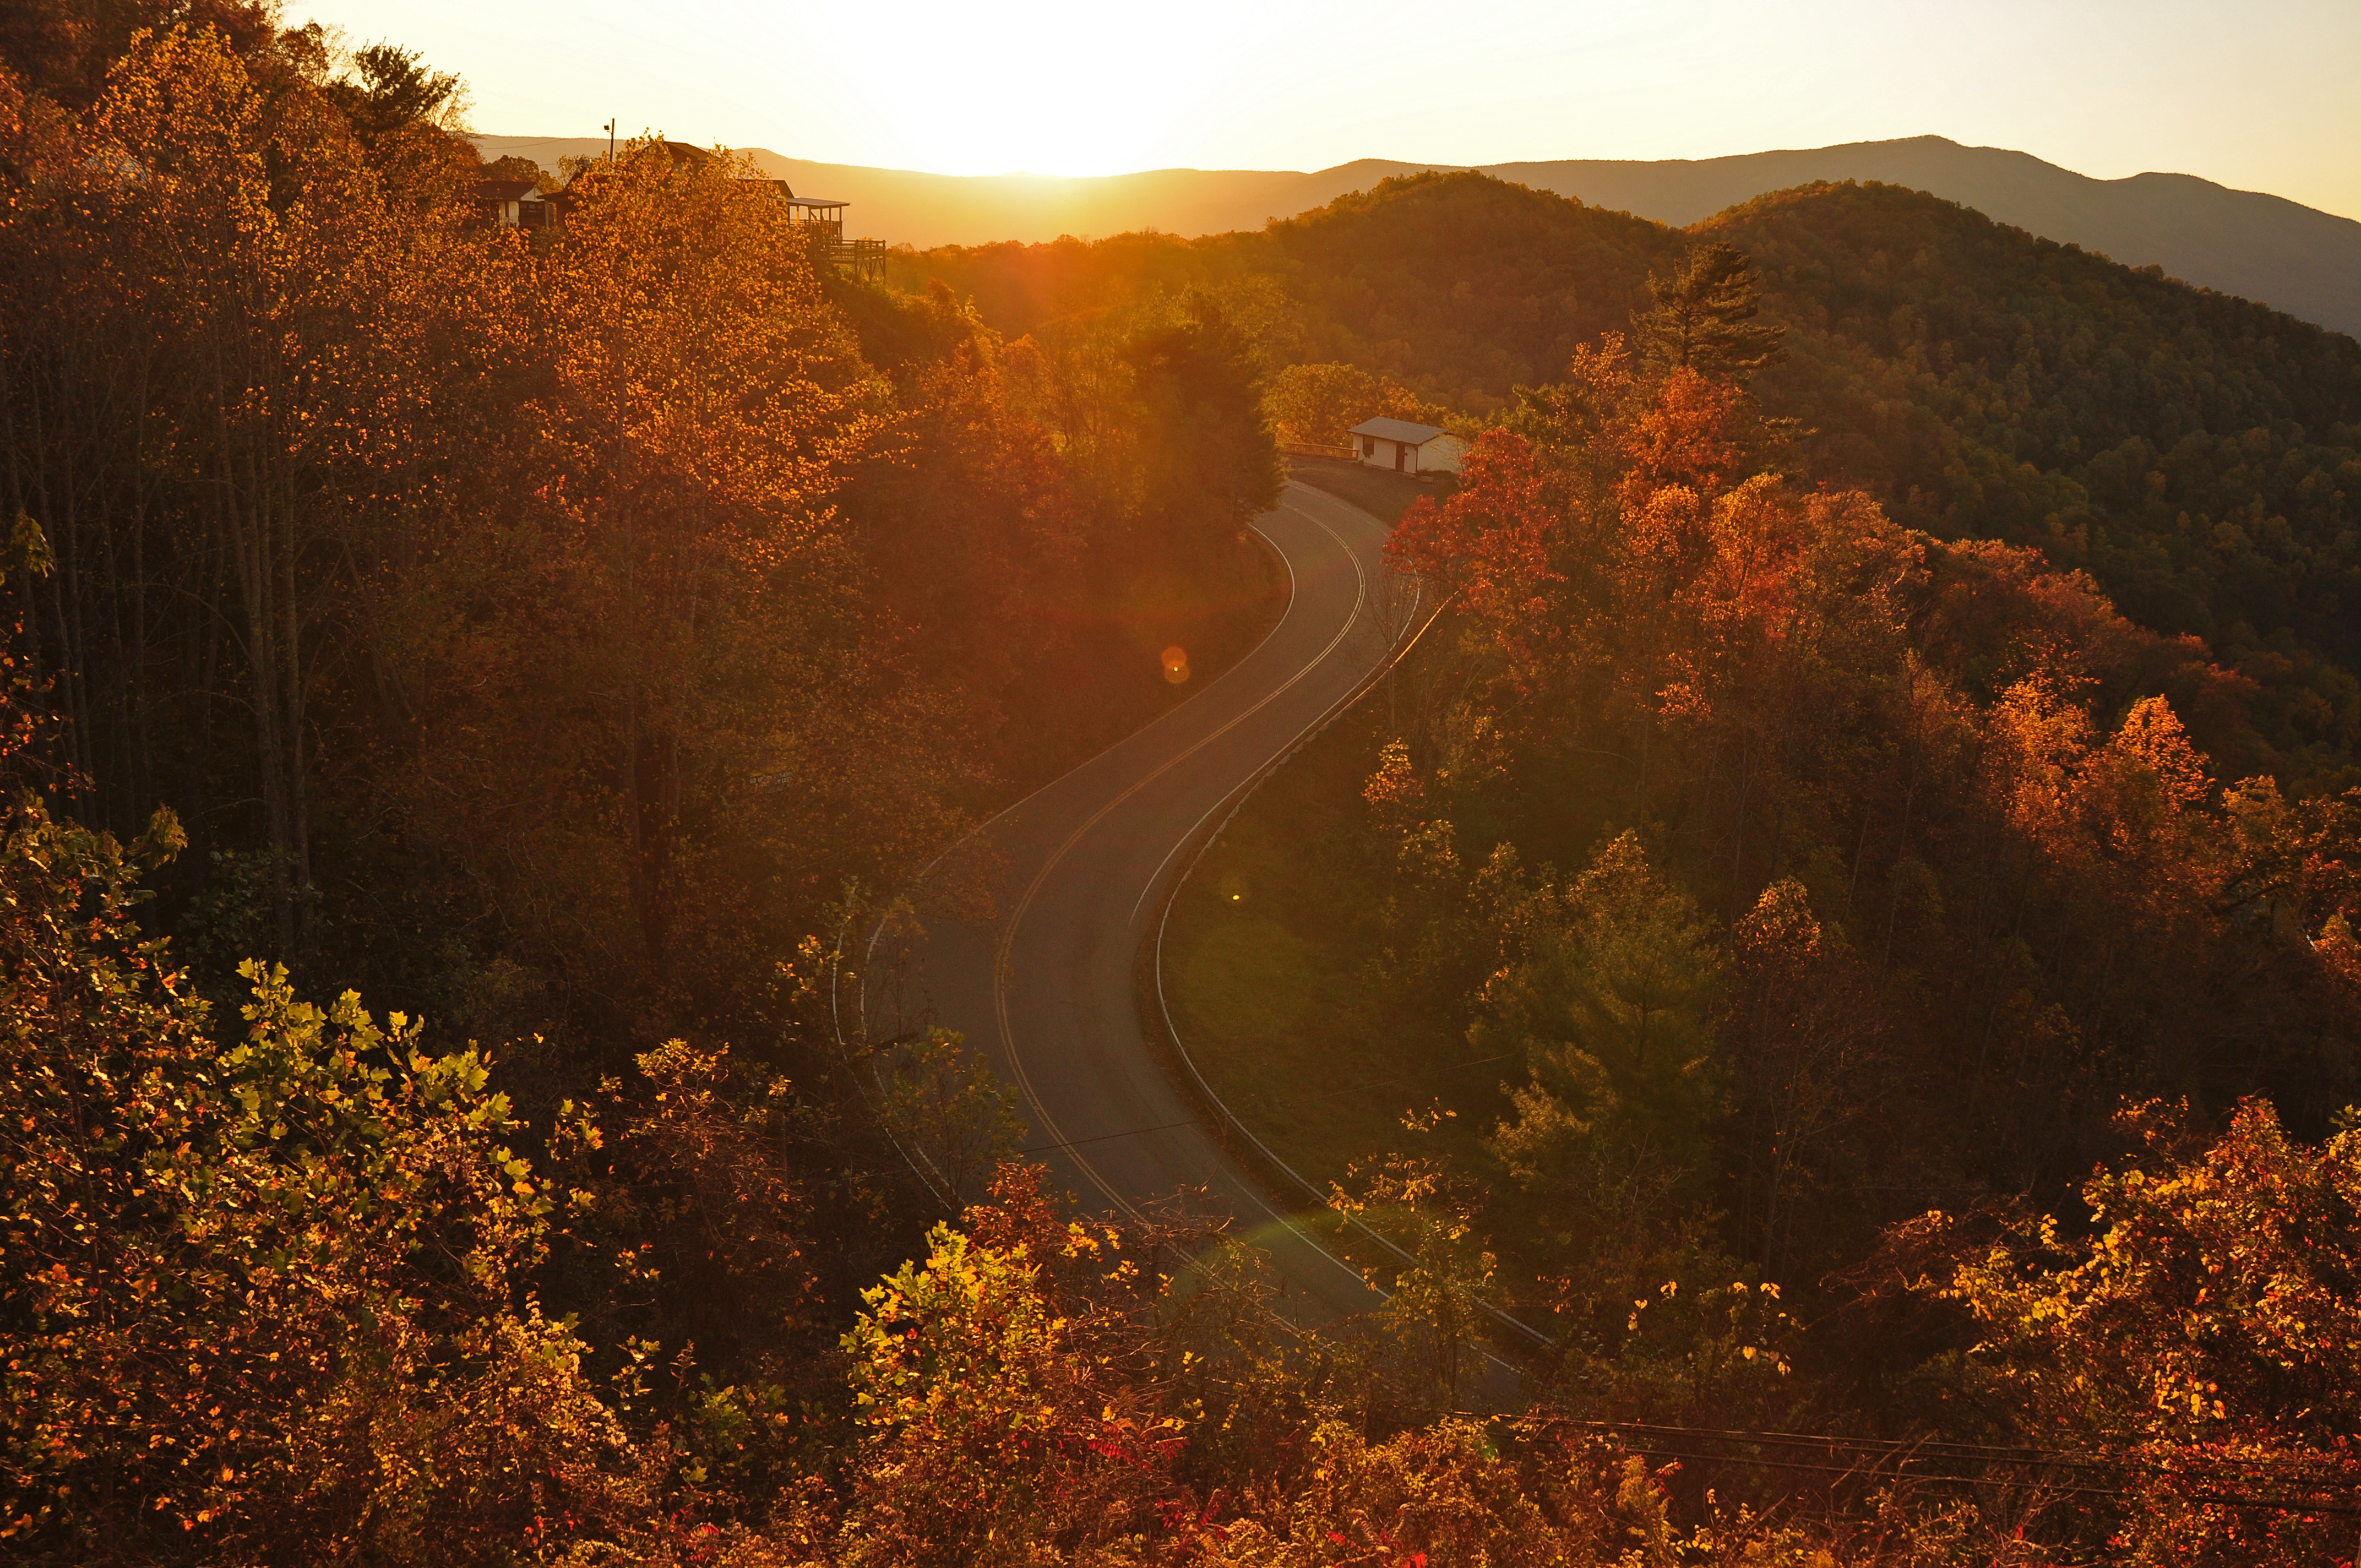 An empty road winds through forest scenery with fall colors.